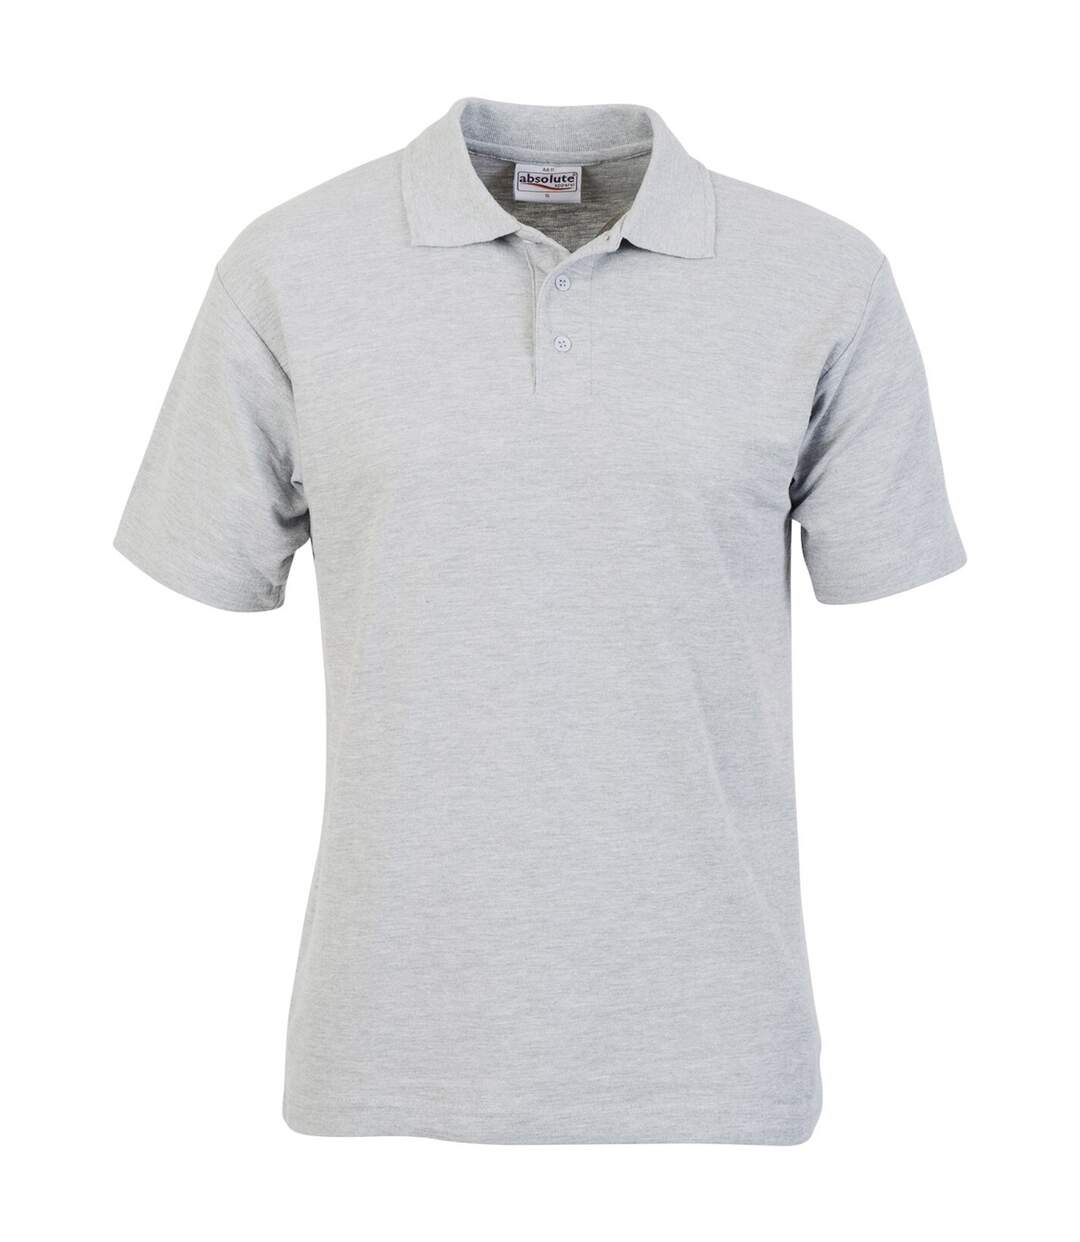 Absolute Apparel - Polo manches courtes PIONNER - Homme (Gris) - UTAB104